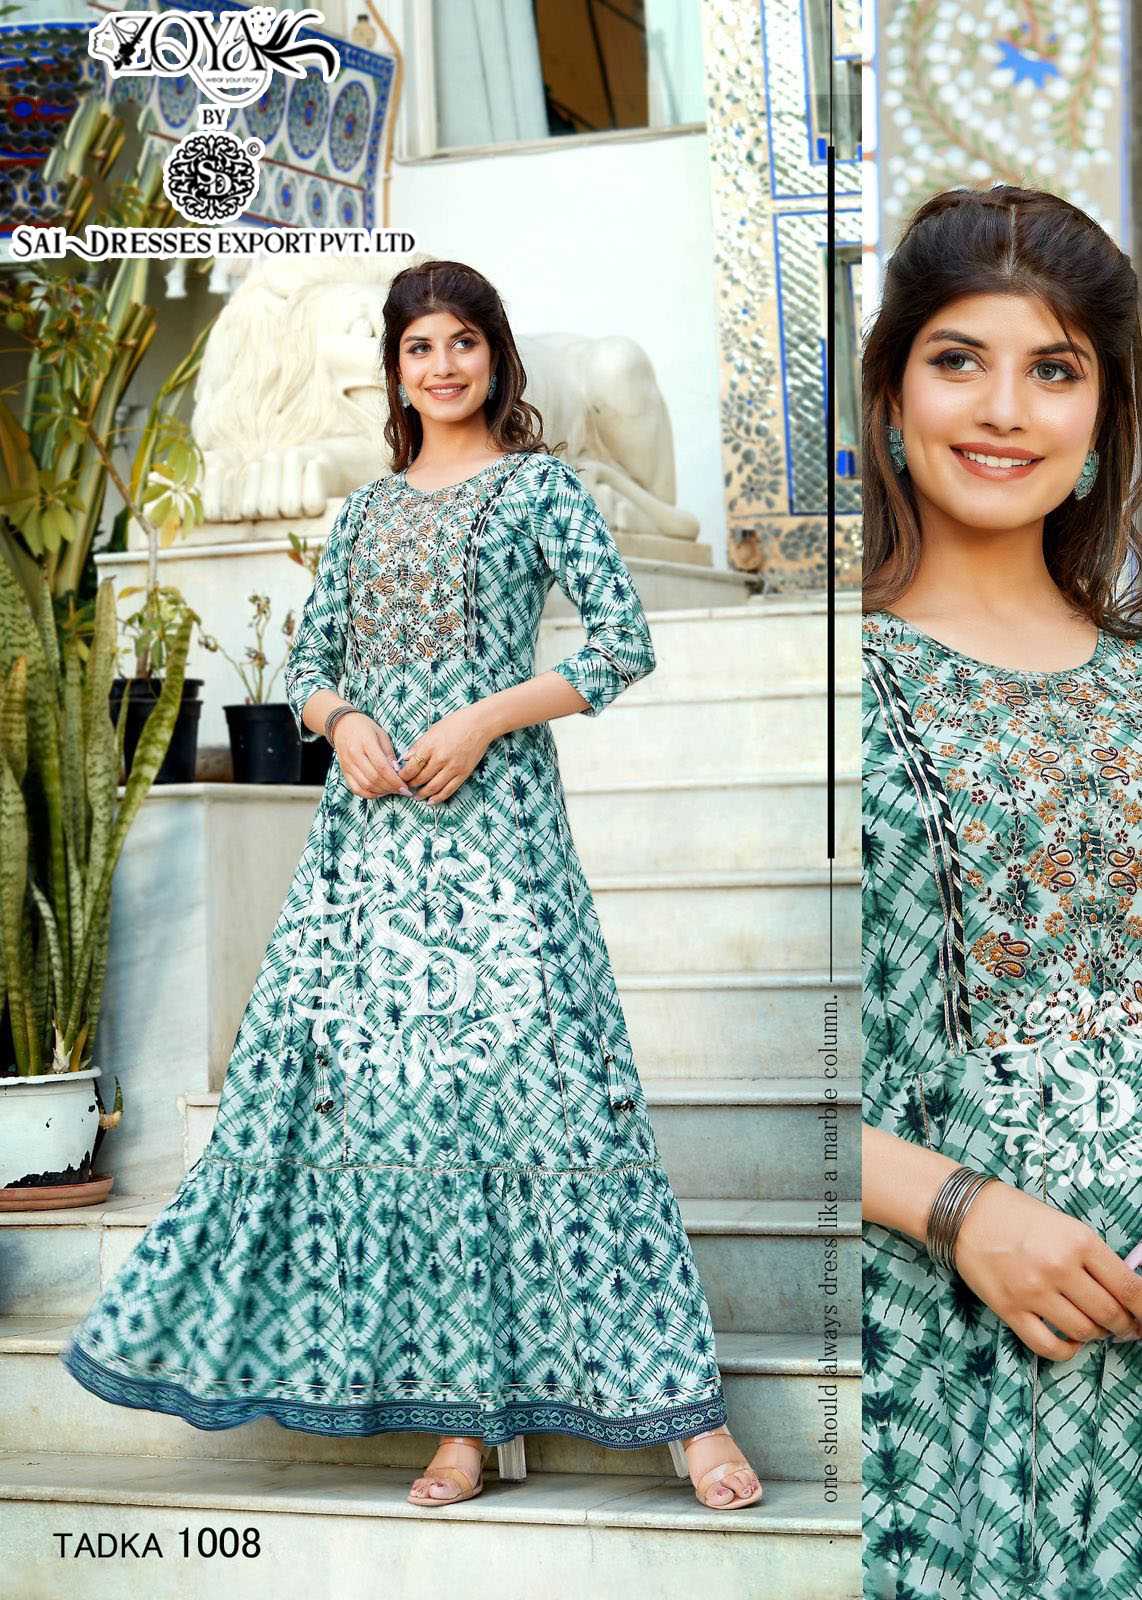 SAI DRESSES PRESENT FASHION TADKA VOL 1 READY TO CLASSY WEAR RAYON SIBHORI PRINTED LONG GOWN STYLE DESIGNER KURTIS IN WHOLESALE RATE IN SURAT